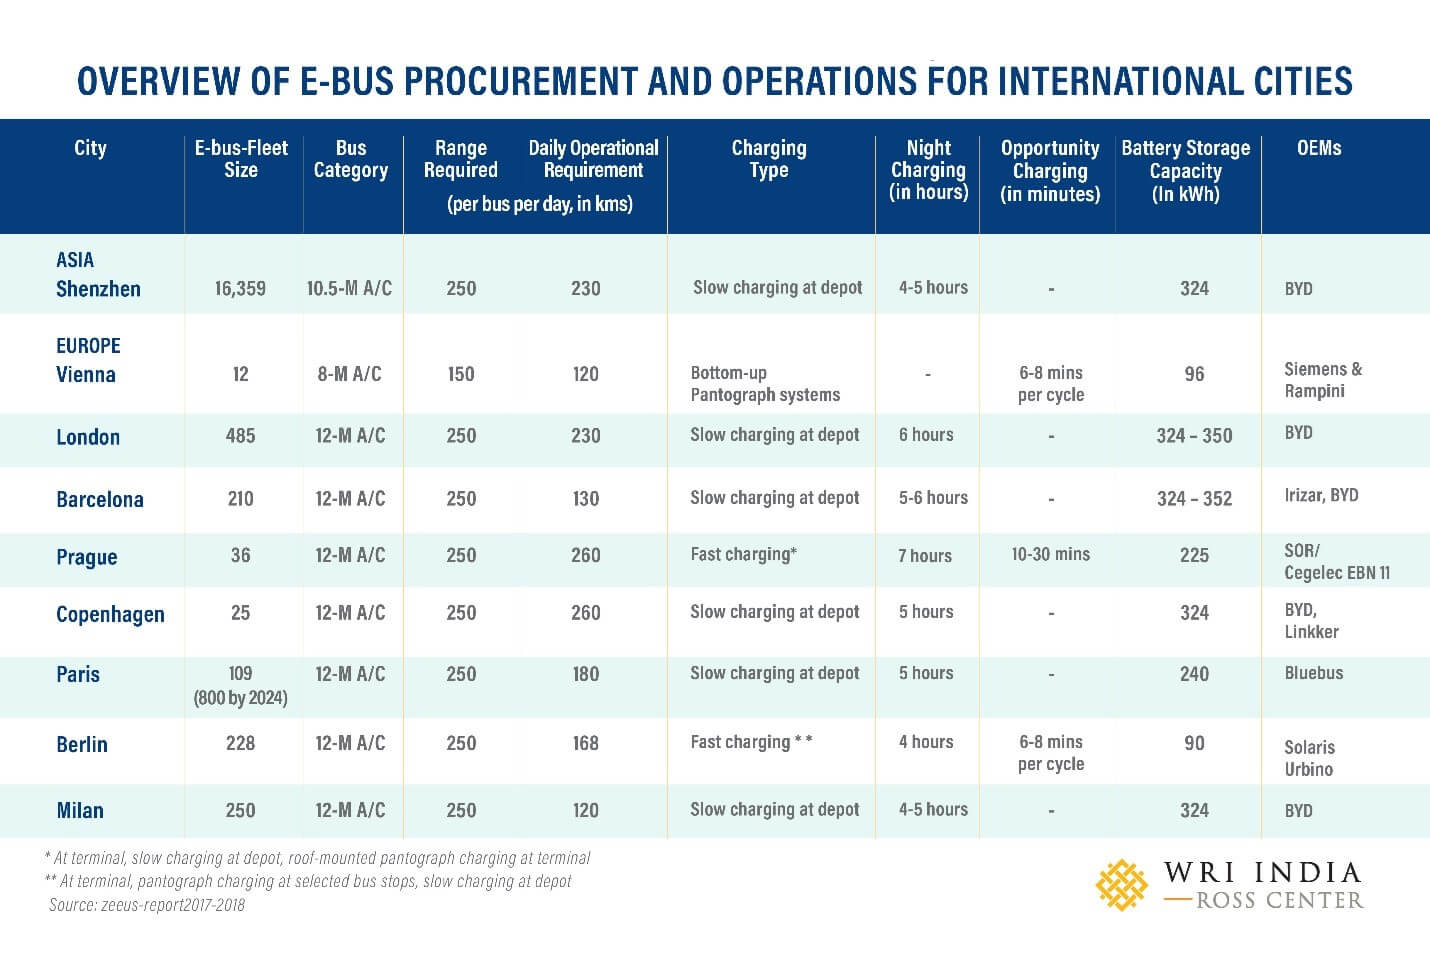 Comparative details of electric bus procurement and operations across key international cities with a focus on e-bus range and operational kilometers